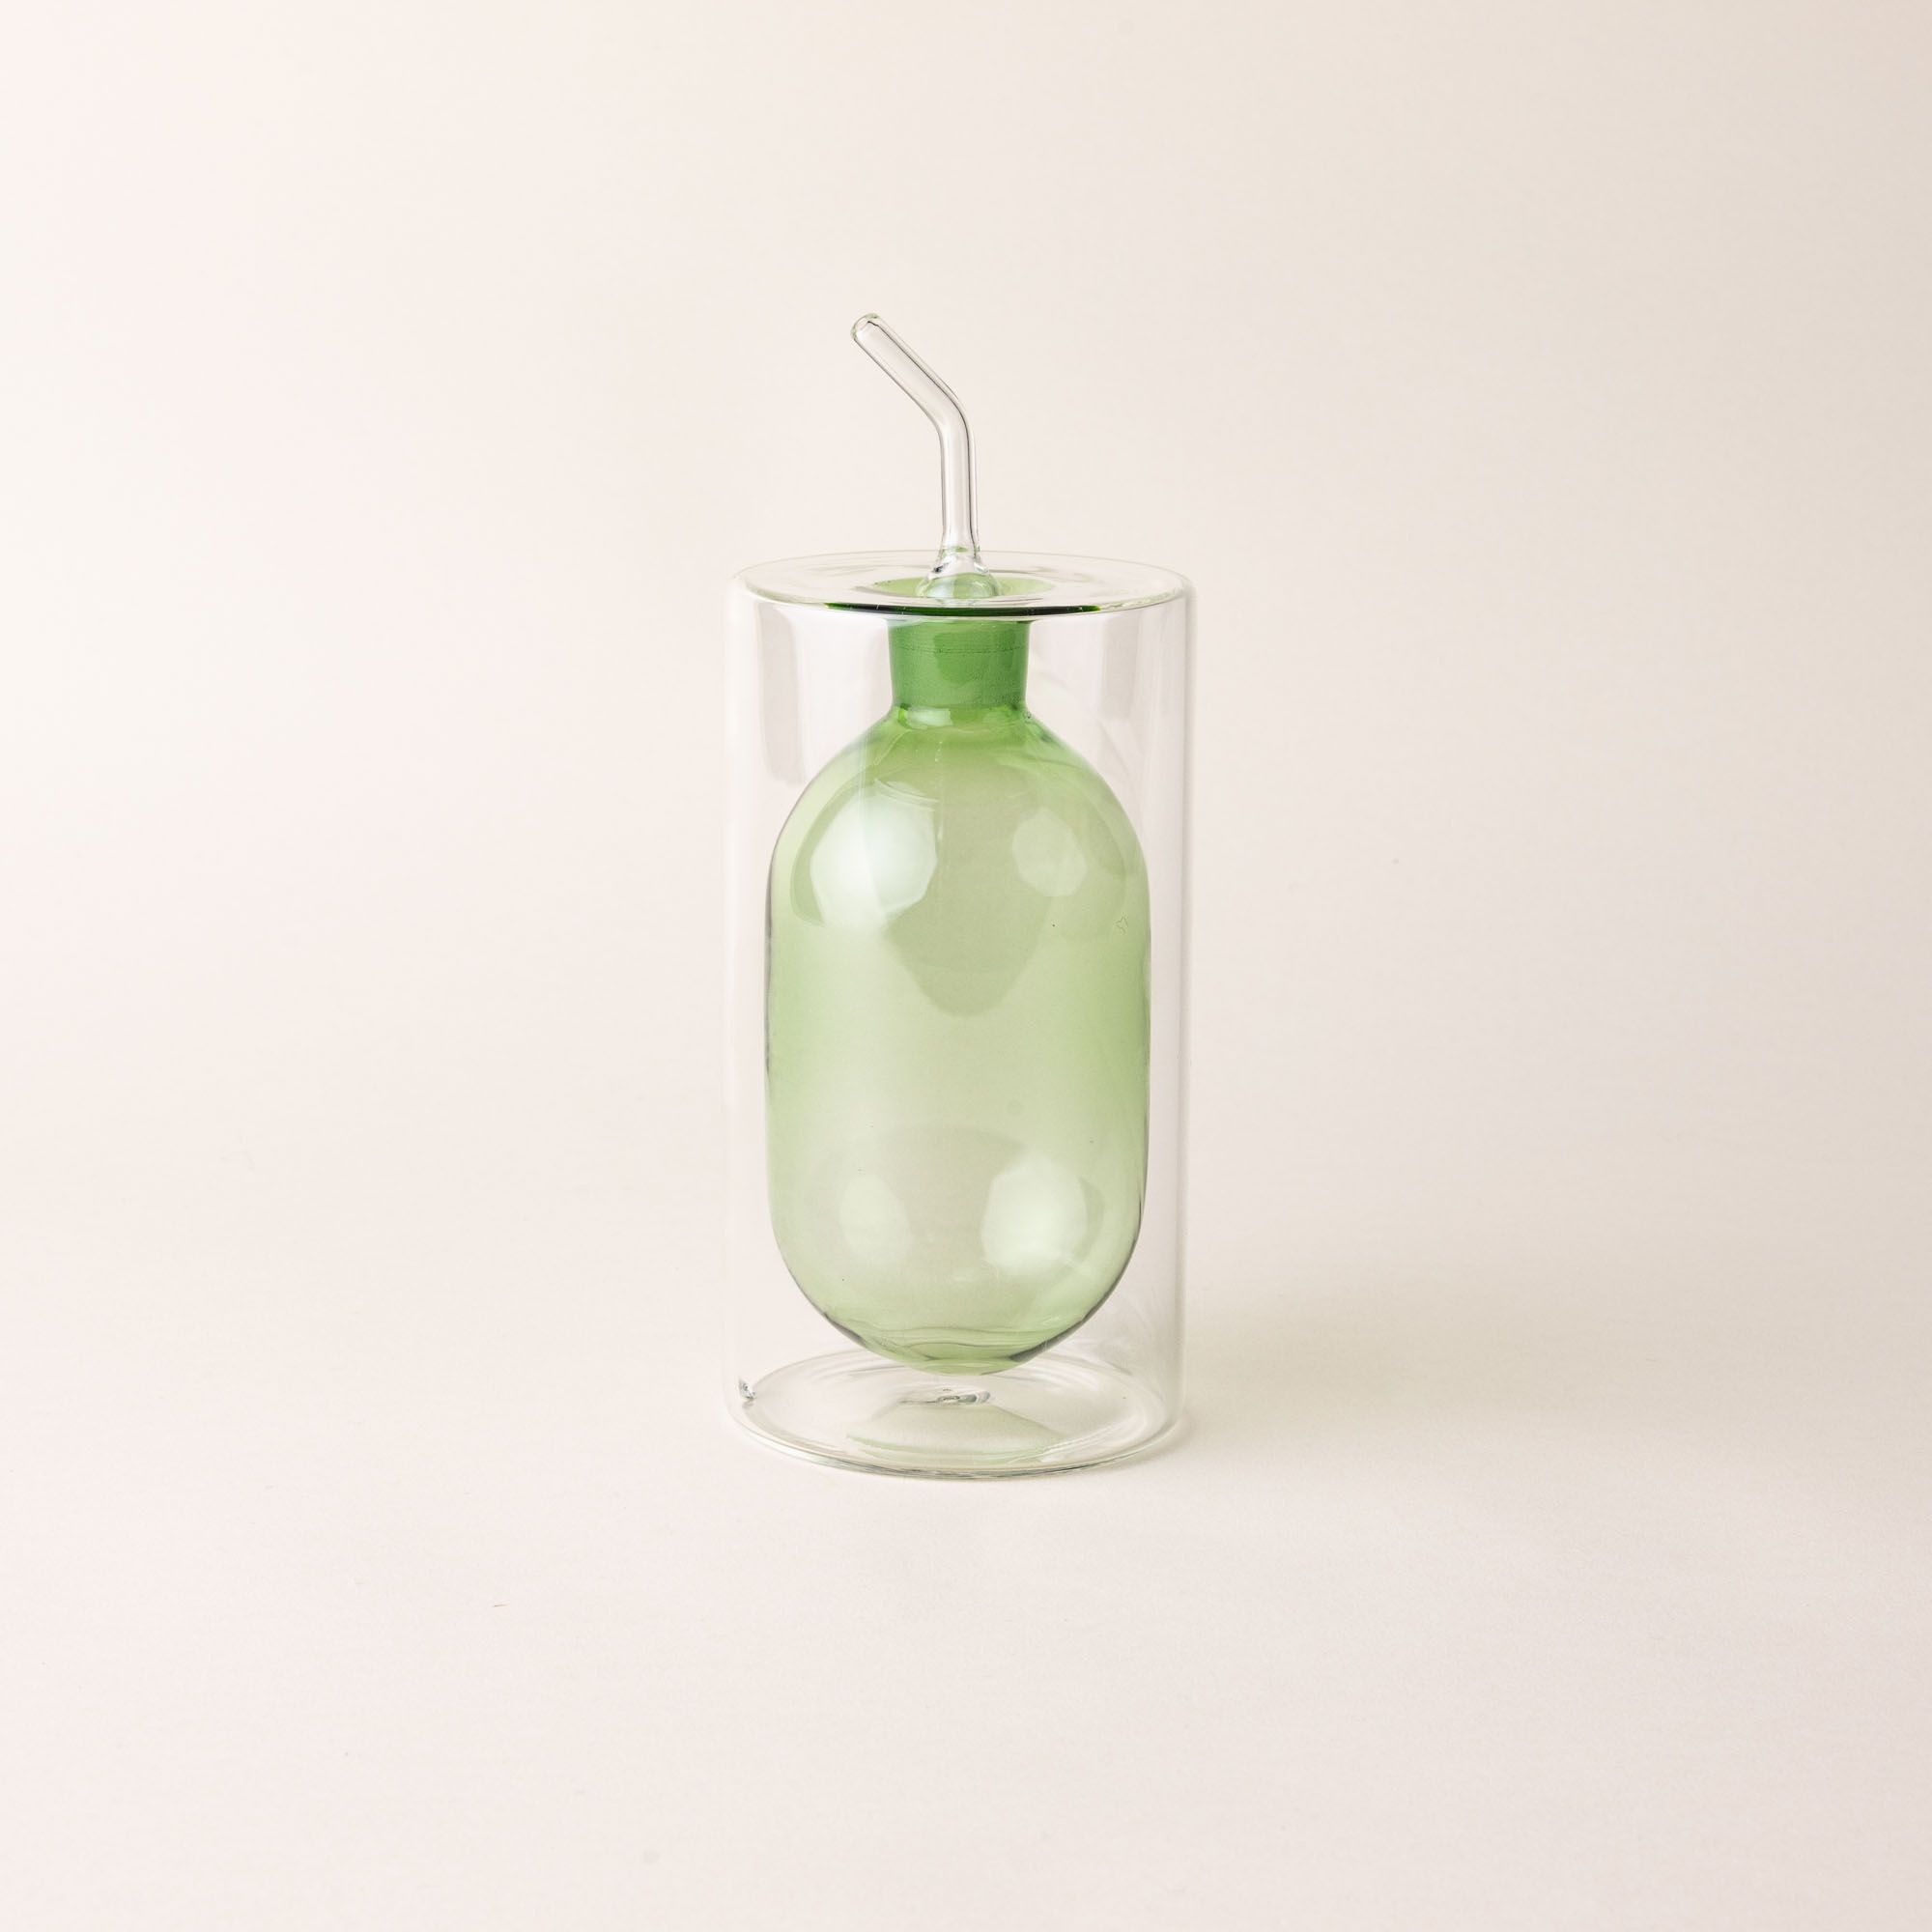 An artful glass cruets in a green color. There is a rounded bulb that acts as a container for the cruet, surrounded by a doubled glass wall.